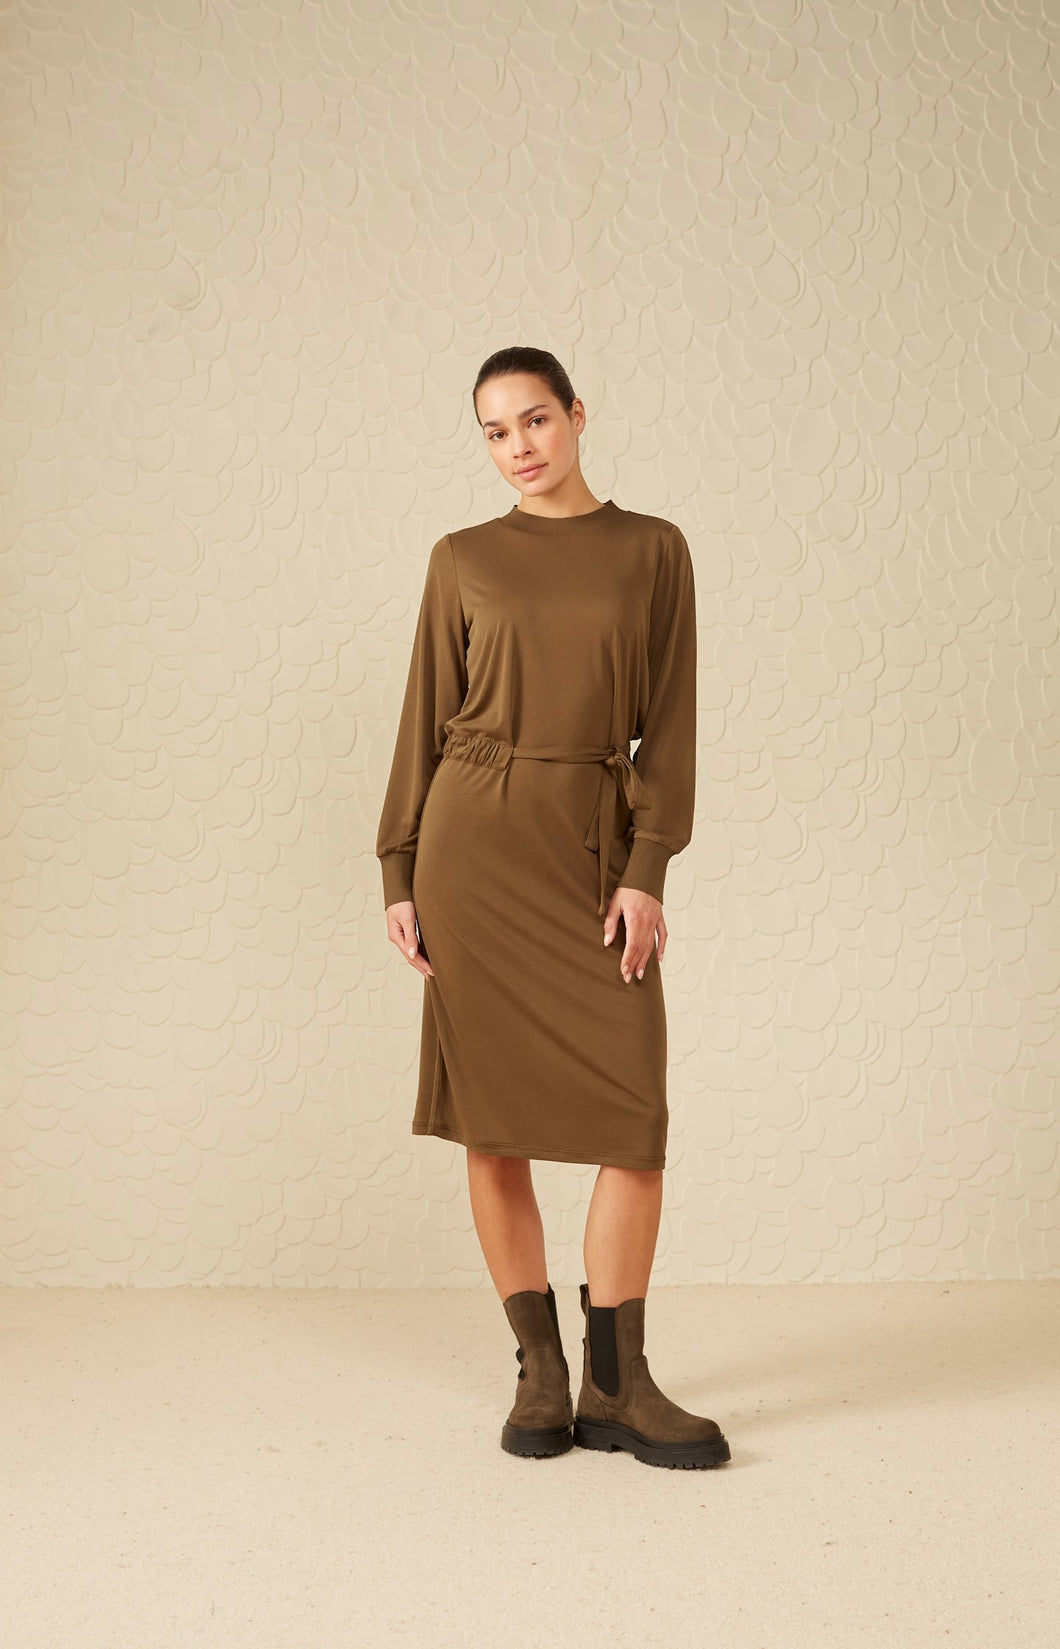 Jersey dress with high neck, long puff sleeves and cord - Dark Army Green - Type: lookbook